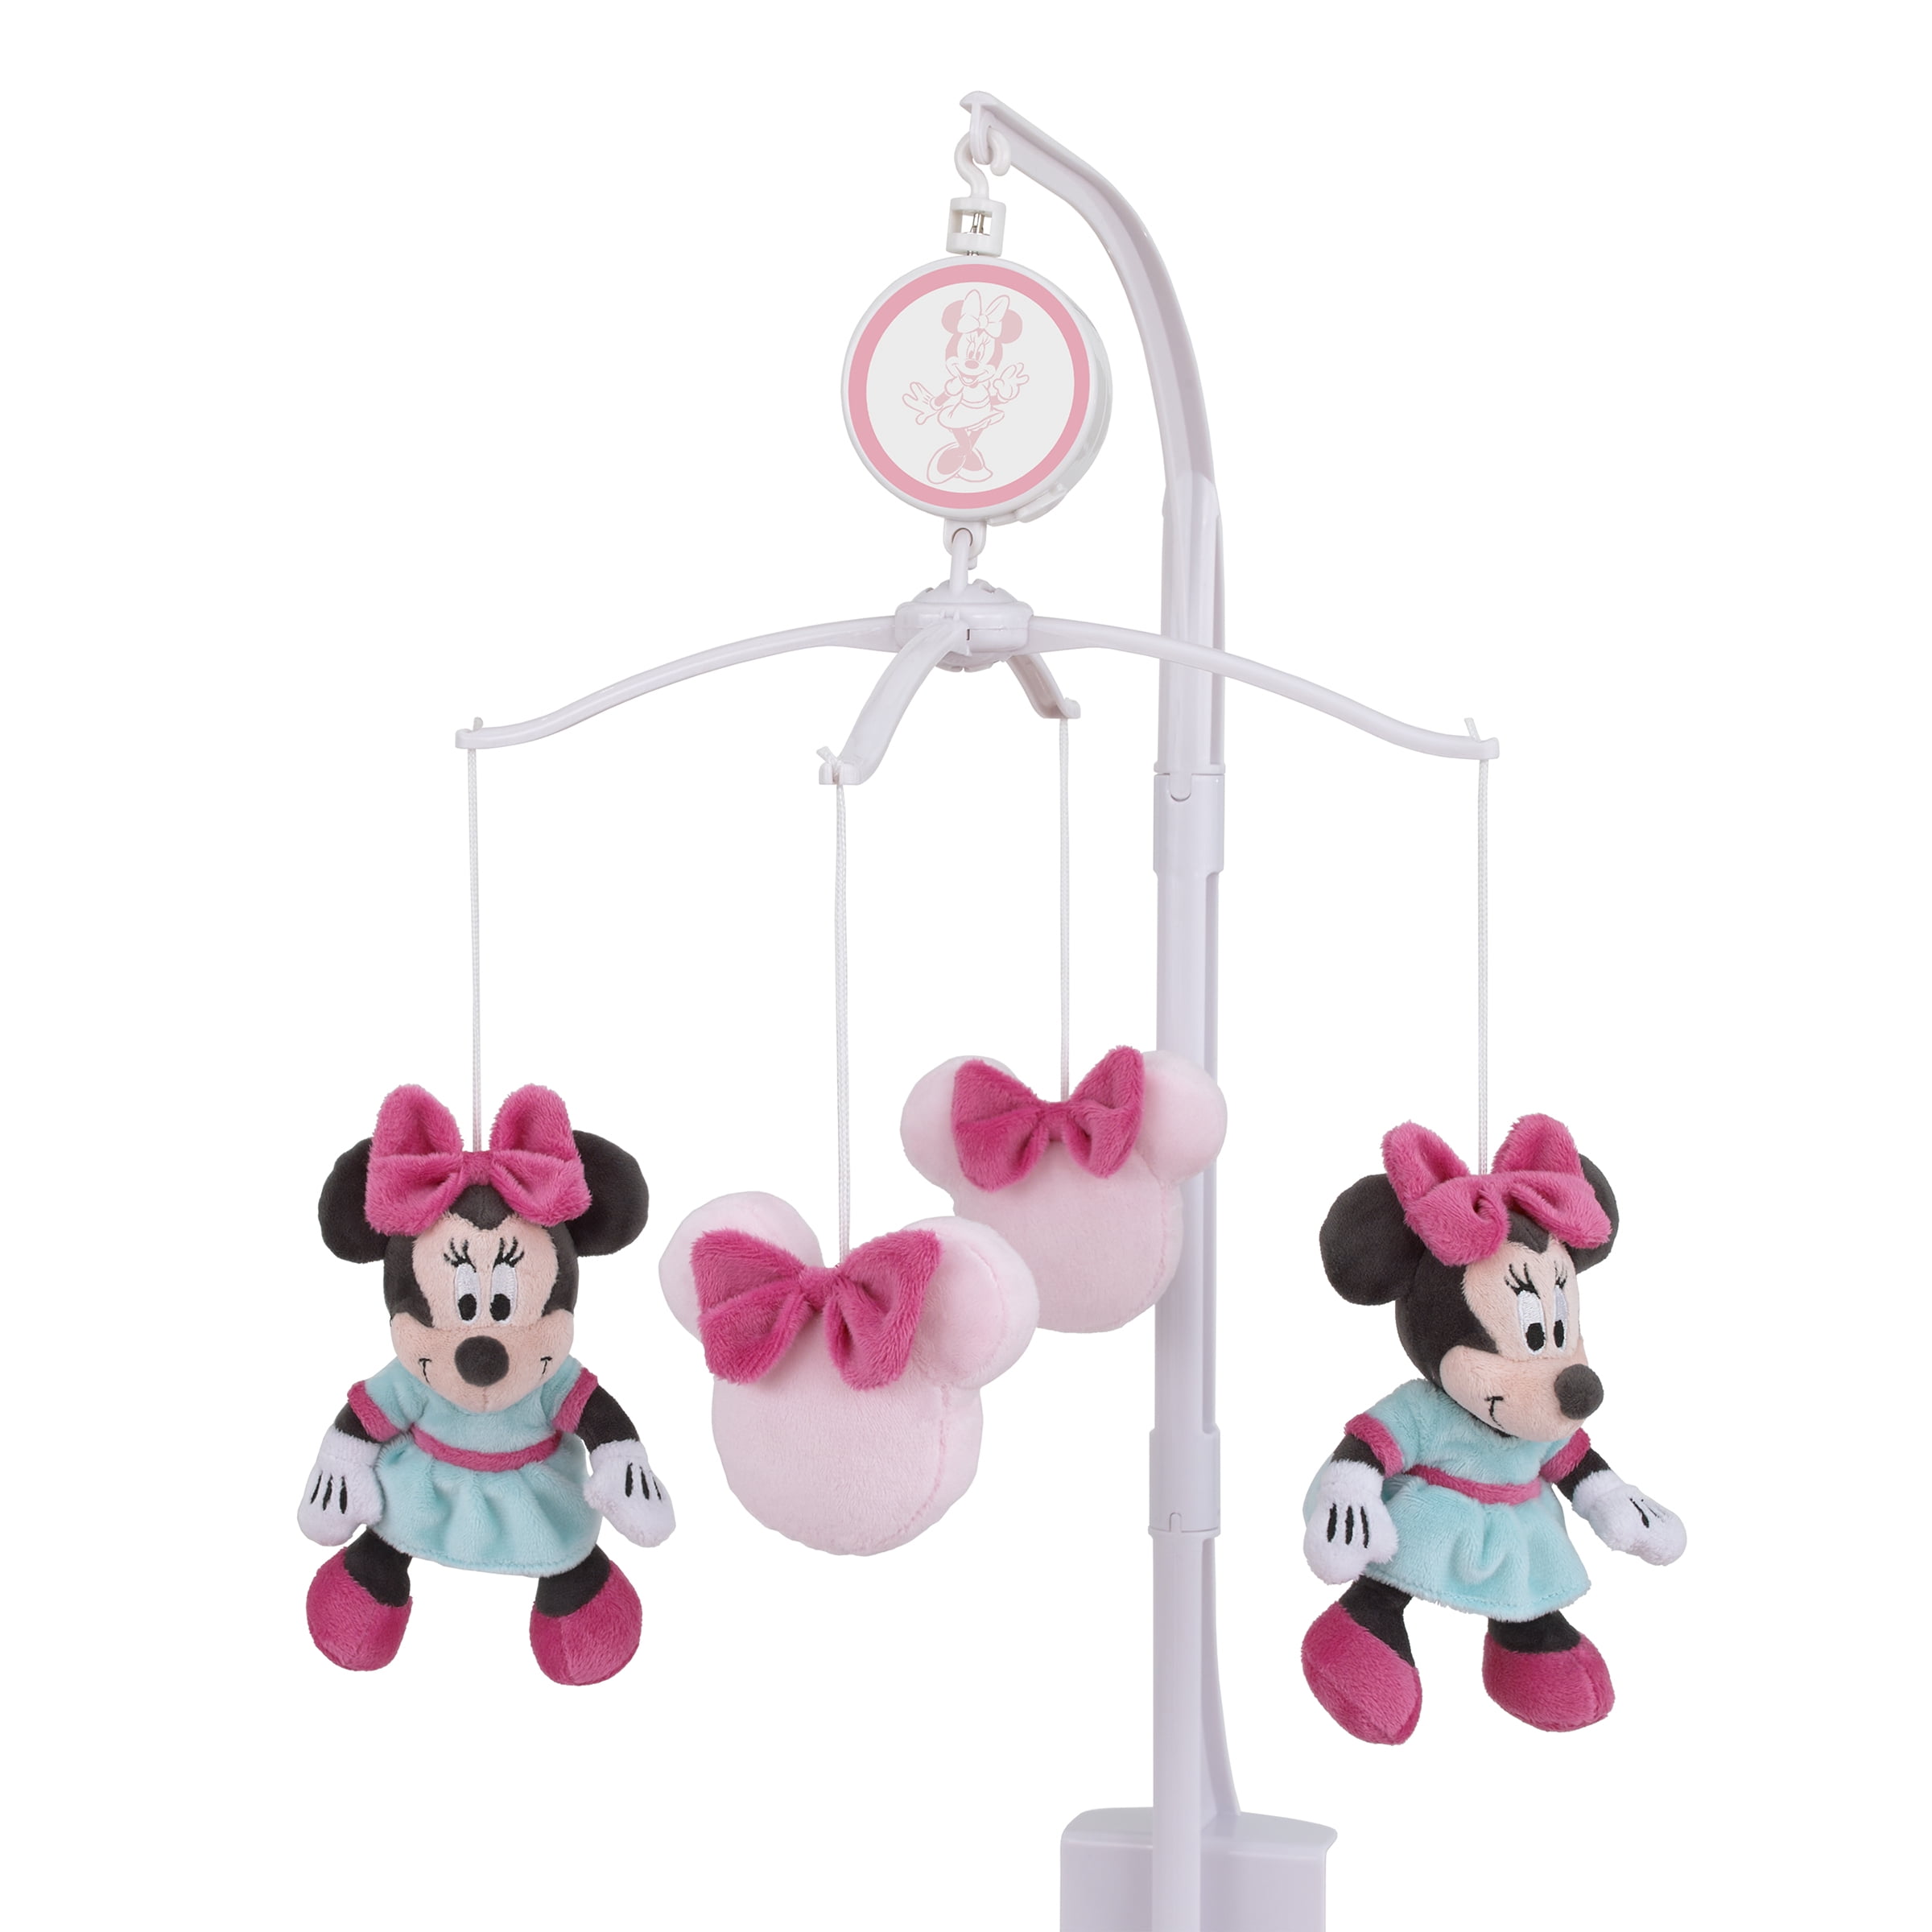 BABY TEETER WATER FILLED RING SOOTHER MINNIE MOUSE IN PINK/RED UK SELLER 